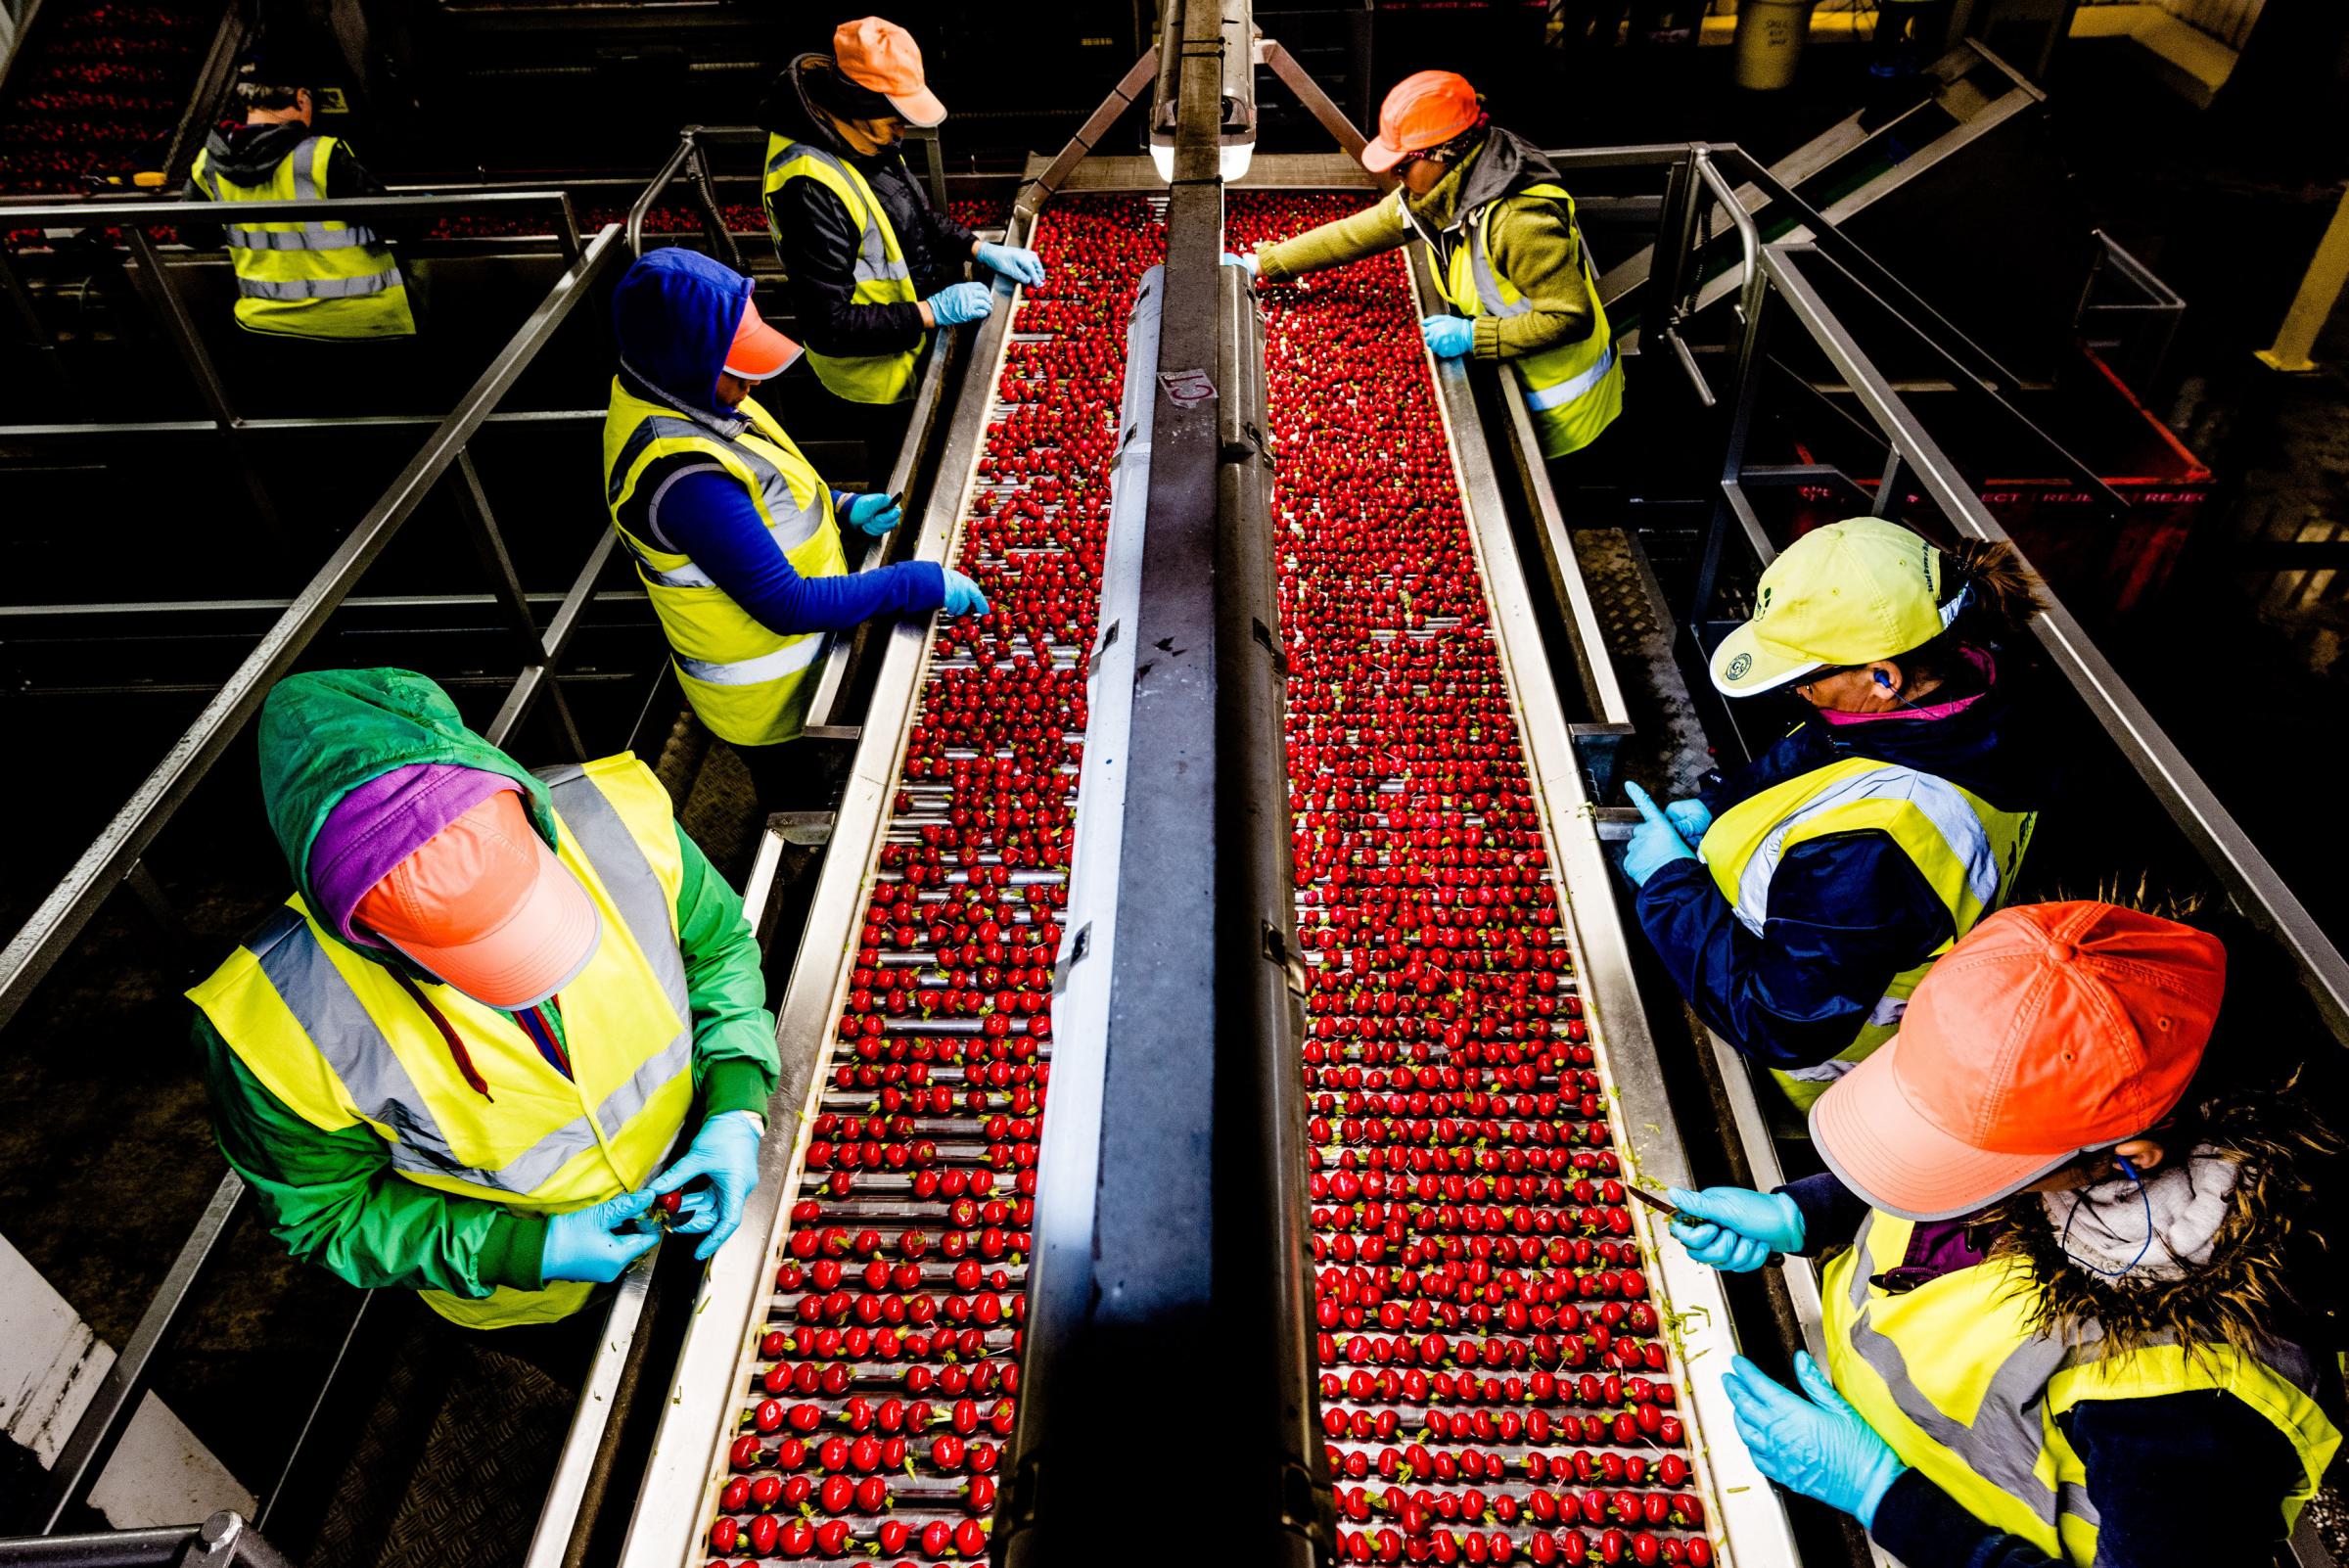 Workers sorting radishes on a production line at a farm in Norfolk